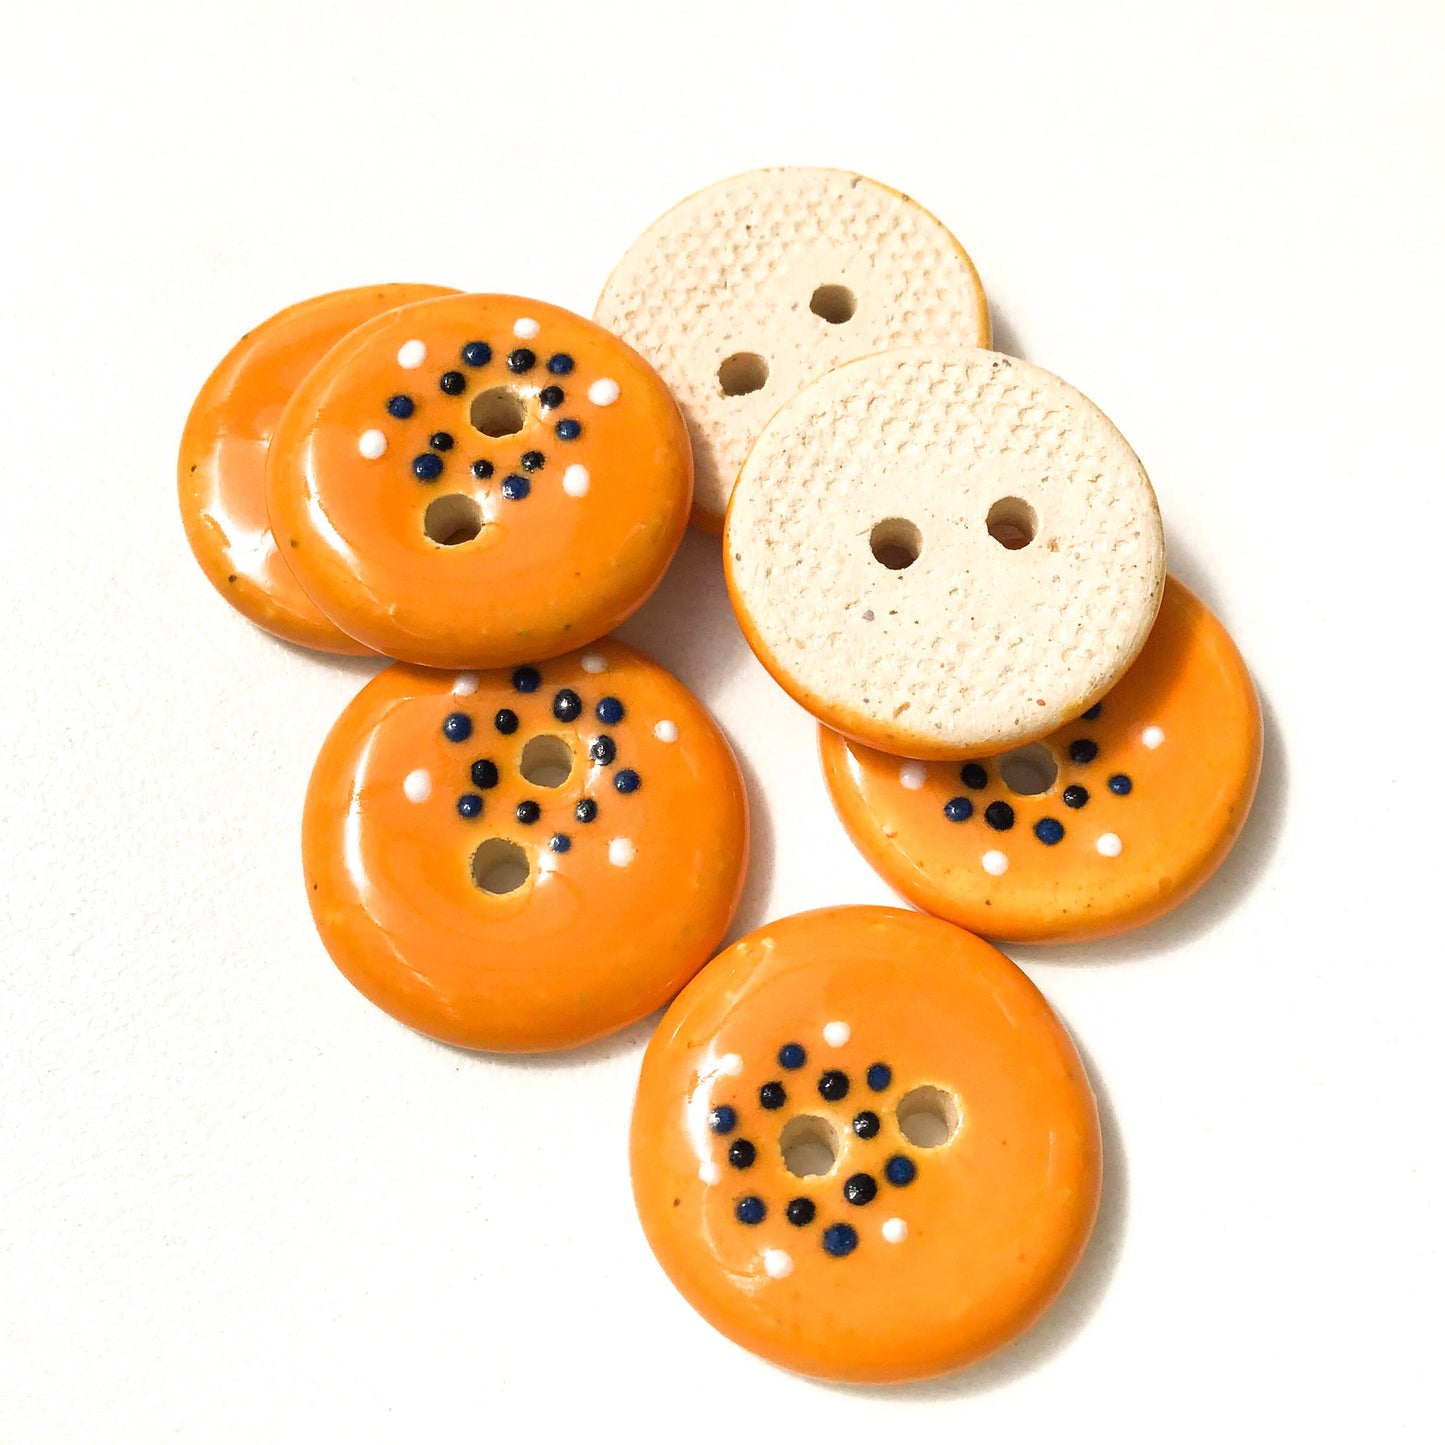 Orange "Spark" Ceramic Buttons - Orange Clay Buttons - 3/4" - 7 Pack